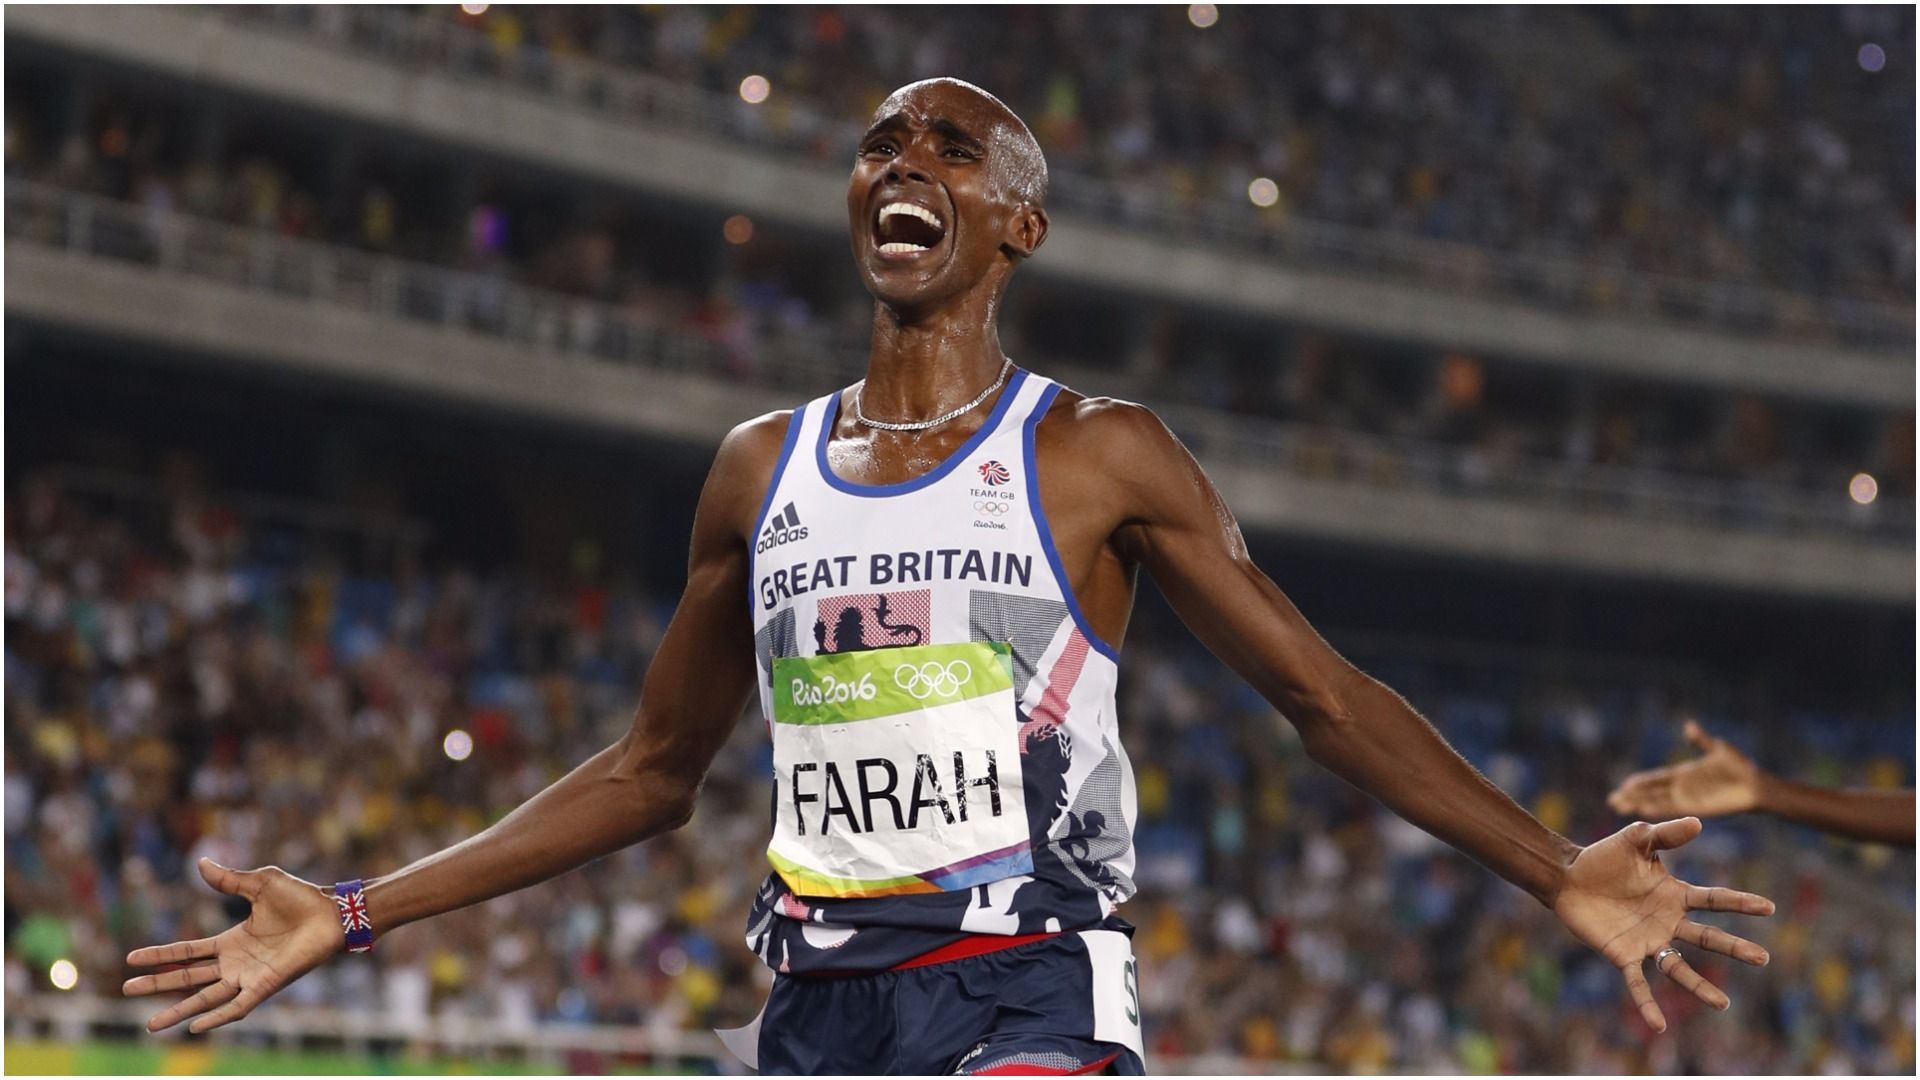 Athletics: Mo Farah insists he is clean amid fresh doping claims